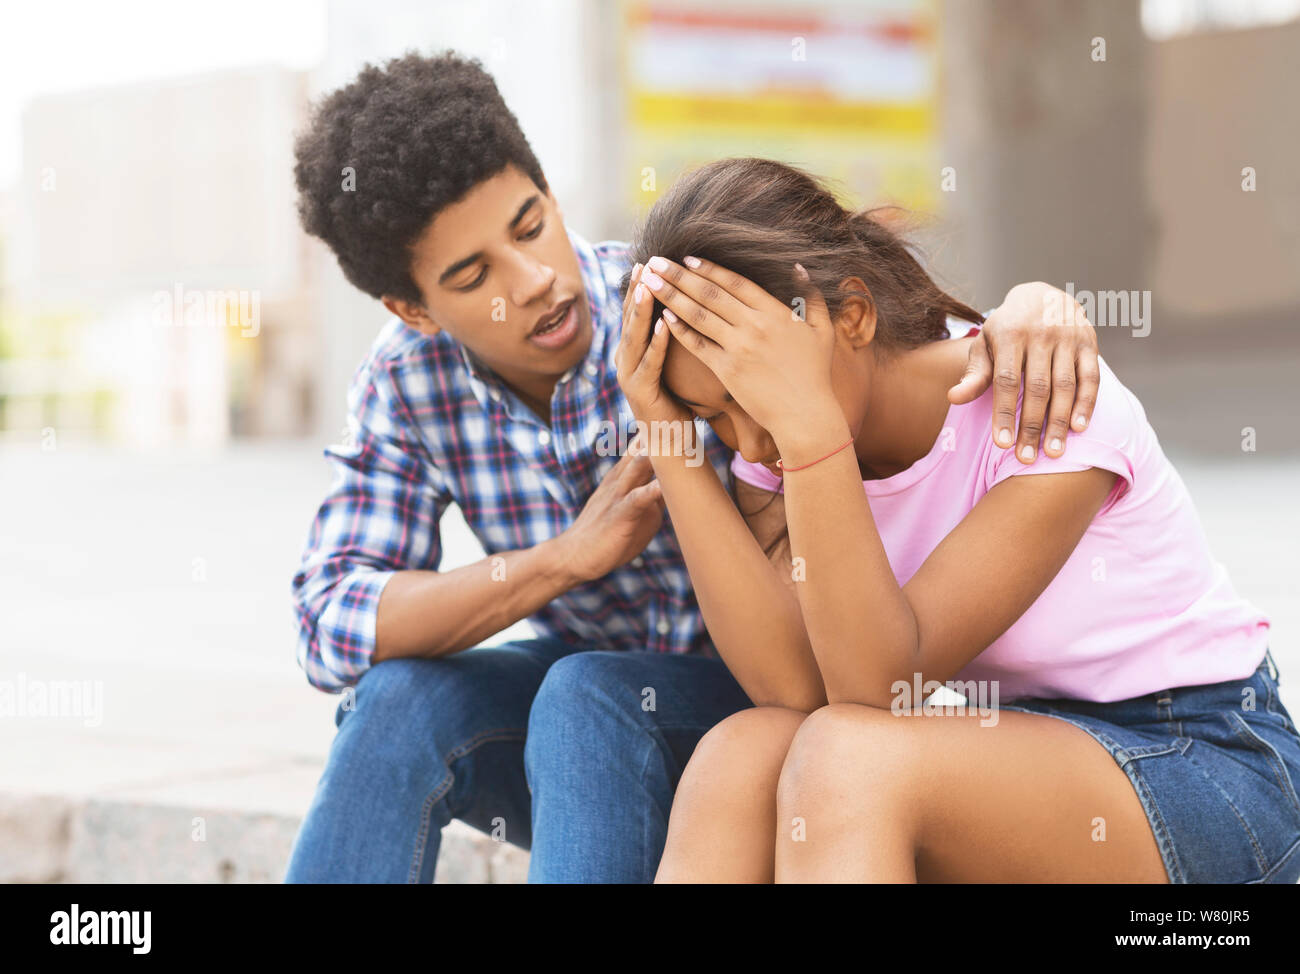 Young guy comforting his sad girlfriend that crying on public Stock Photo